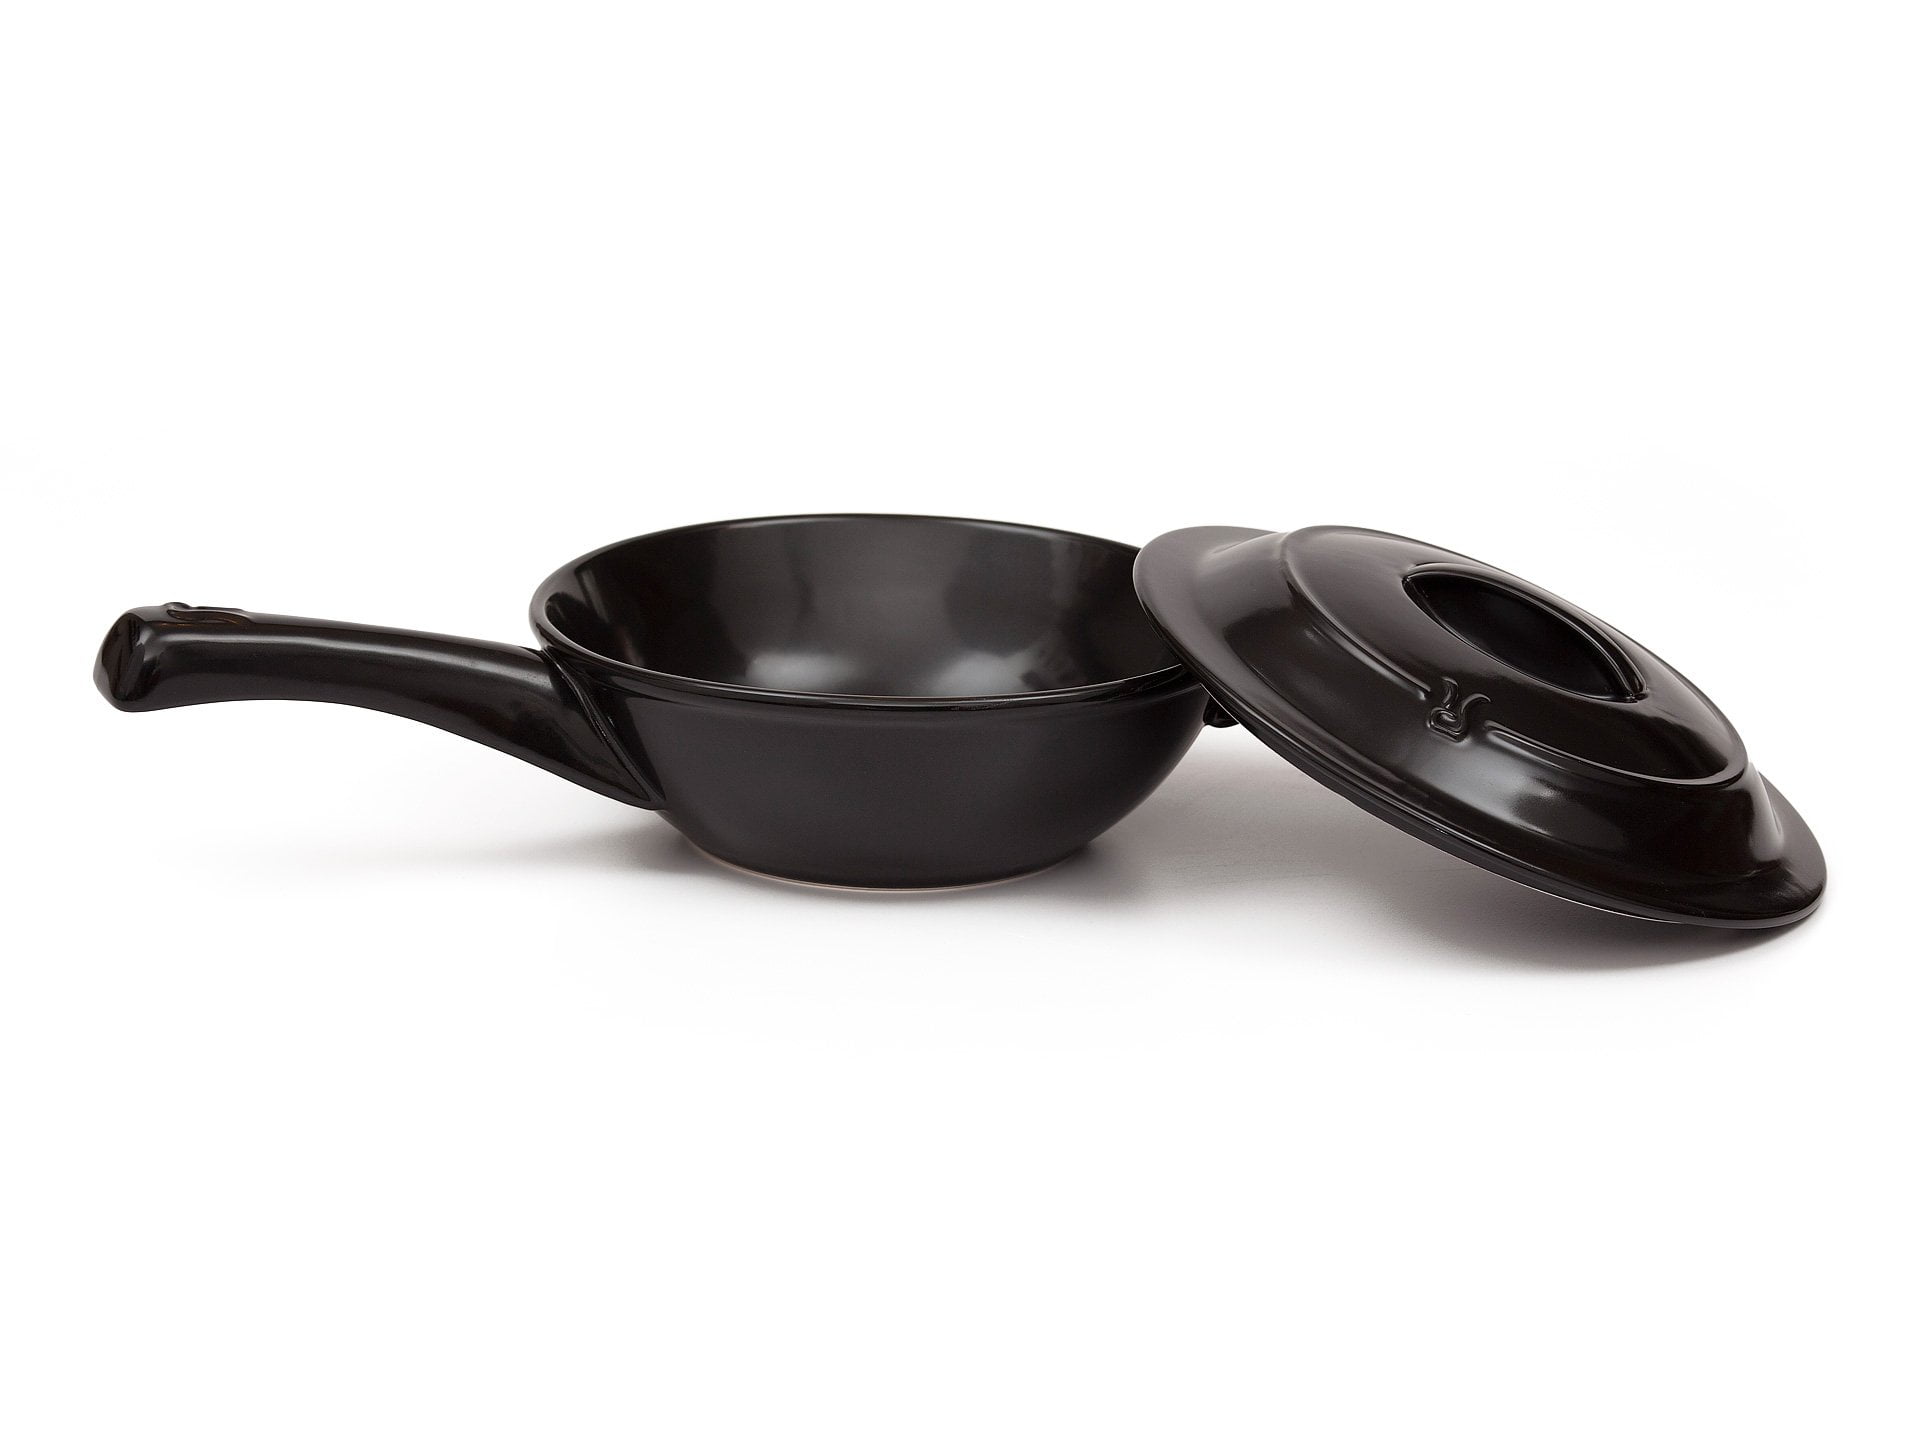 https://greenopedia.com/wp-content/uploads/8-Inch-Traditions-Wok-with-Lid.jpg